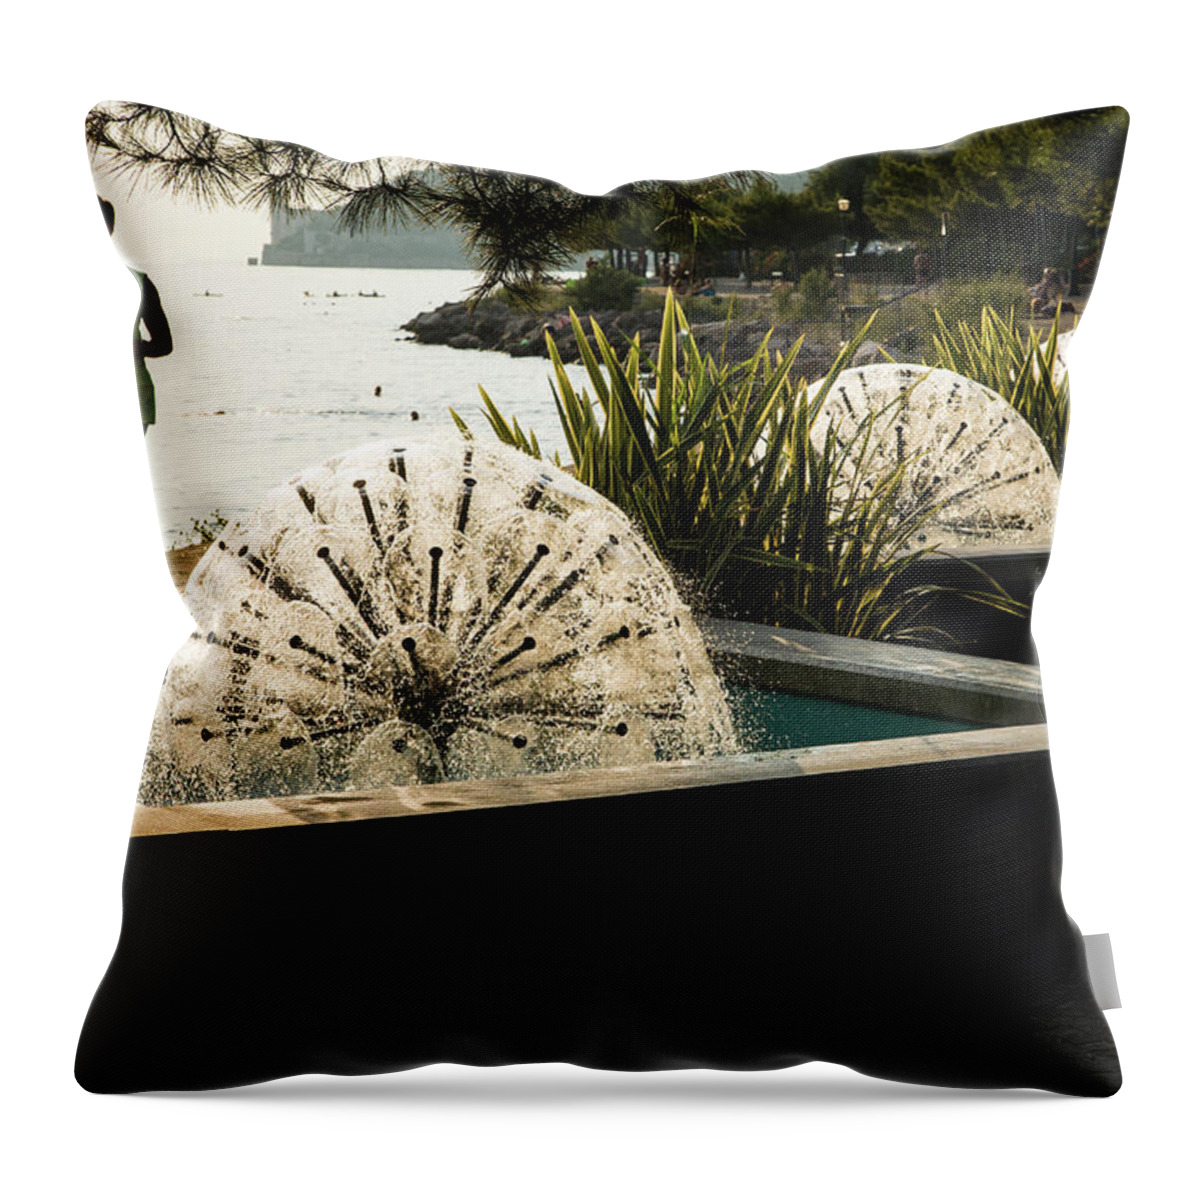 Trieste Throw Pillow featuring the photograph Viale Miramare, Trieste by Ian Middleton